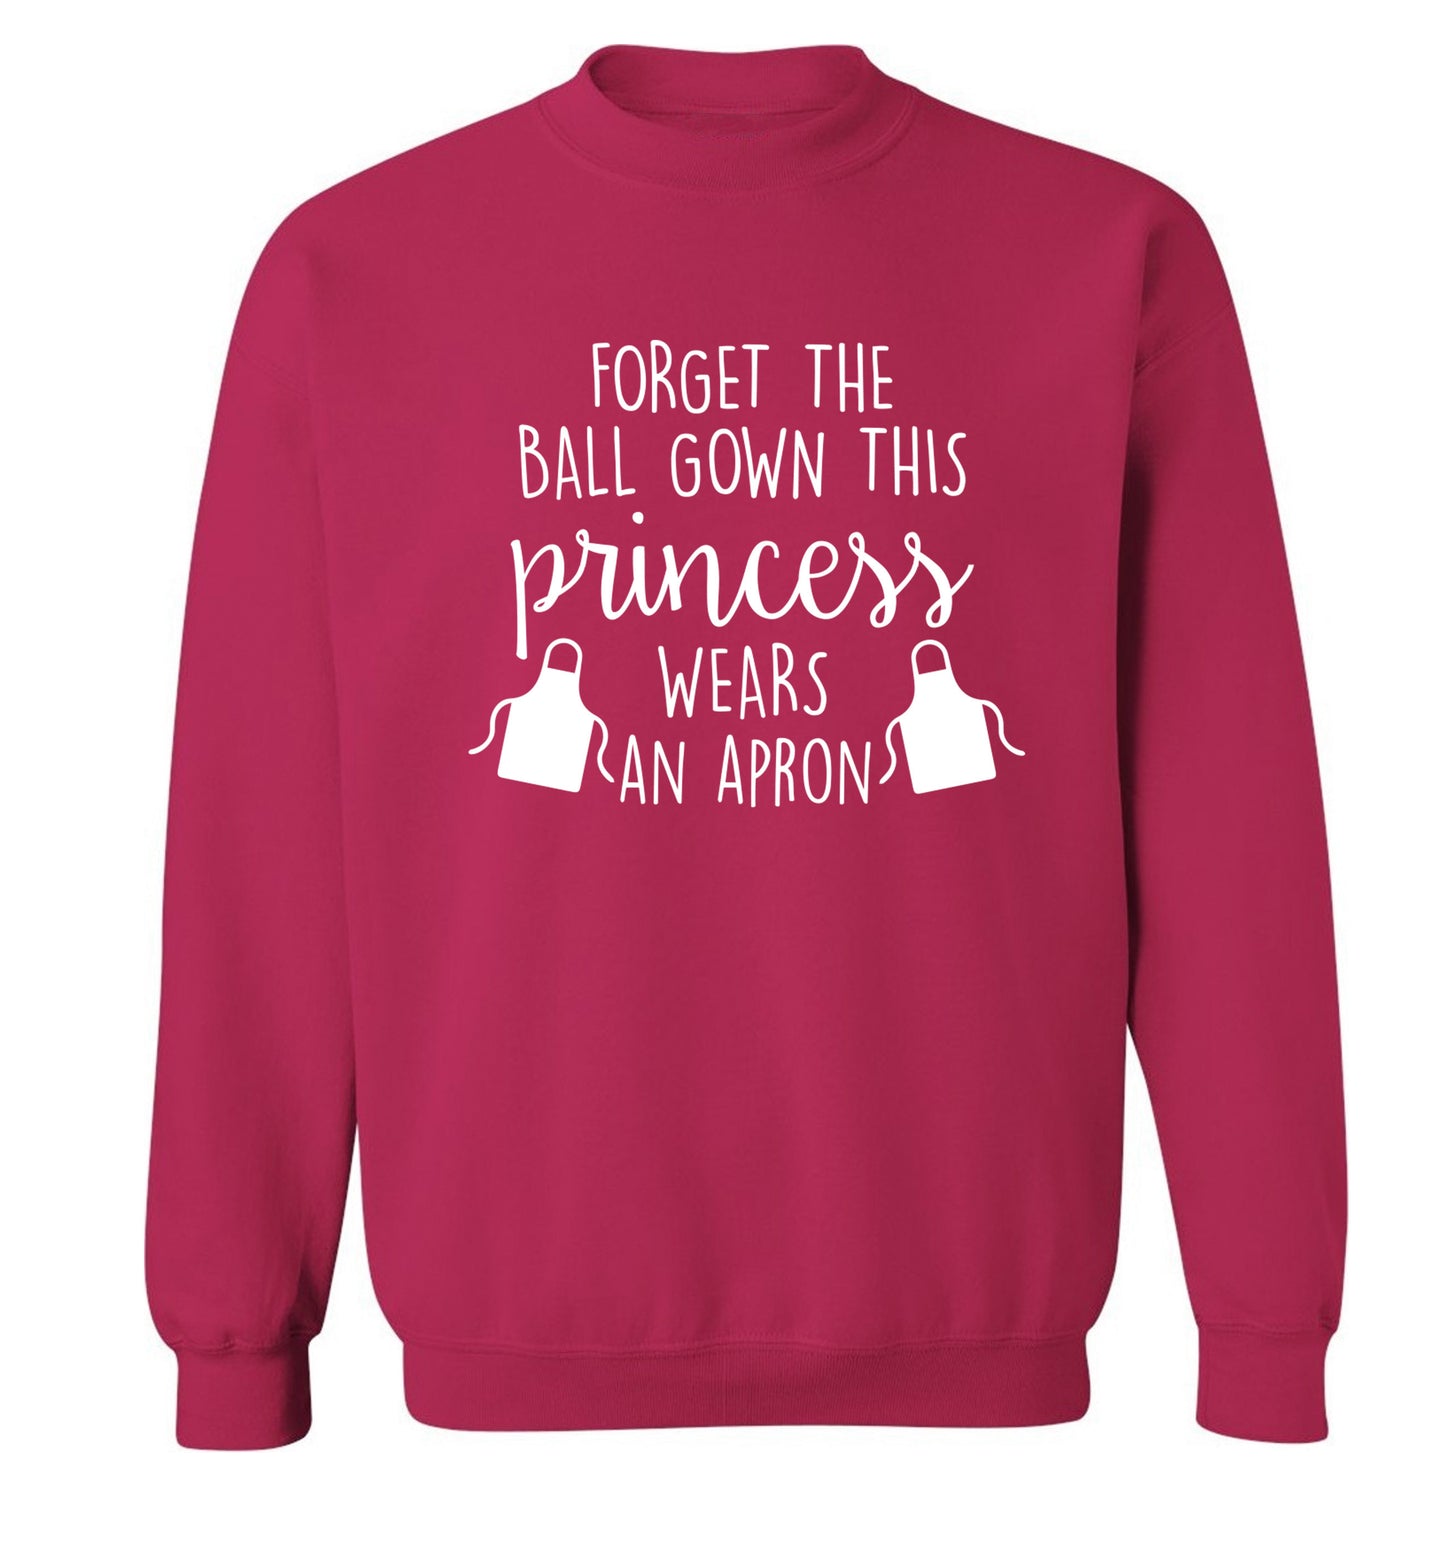 Forget the ball gown this princess wears an apron Adult's unisex pink Sweater 2XL